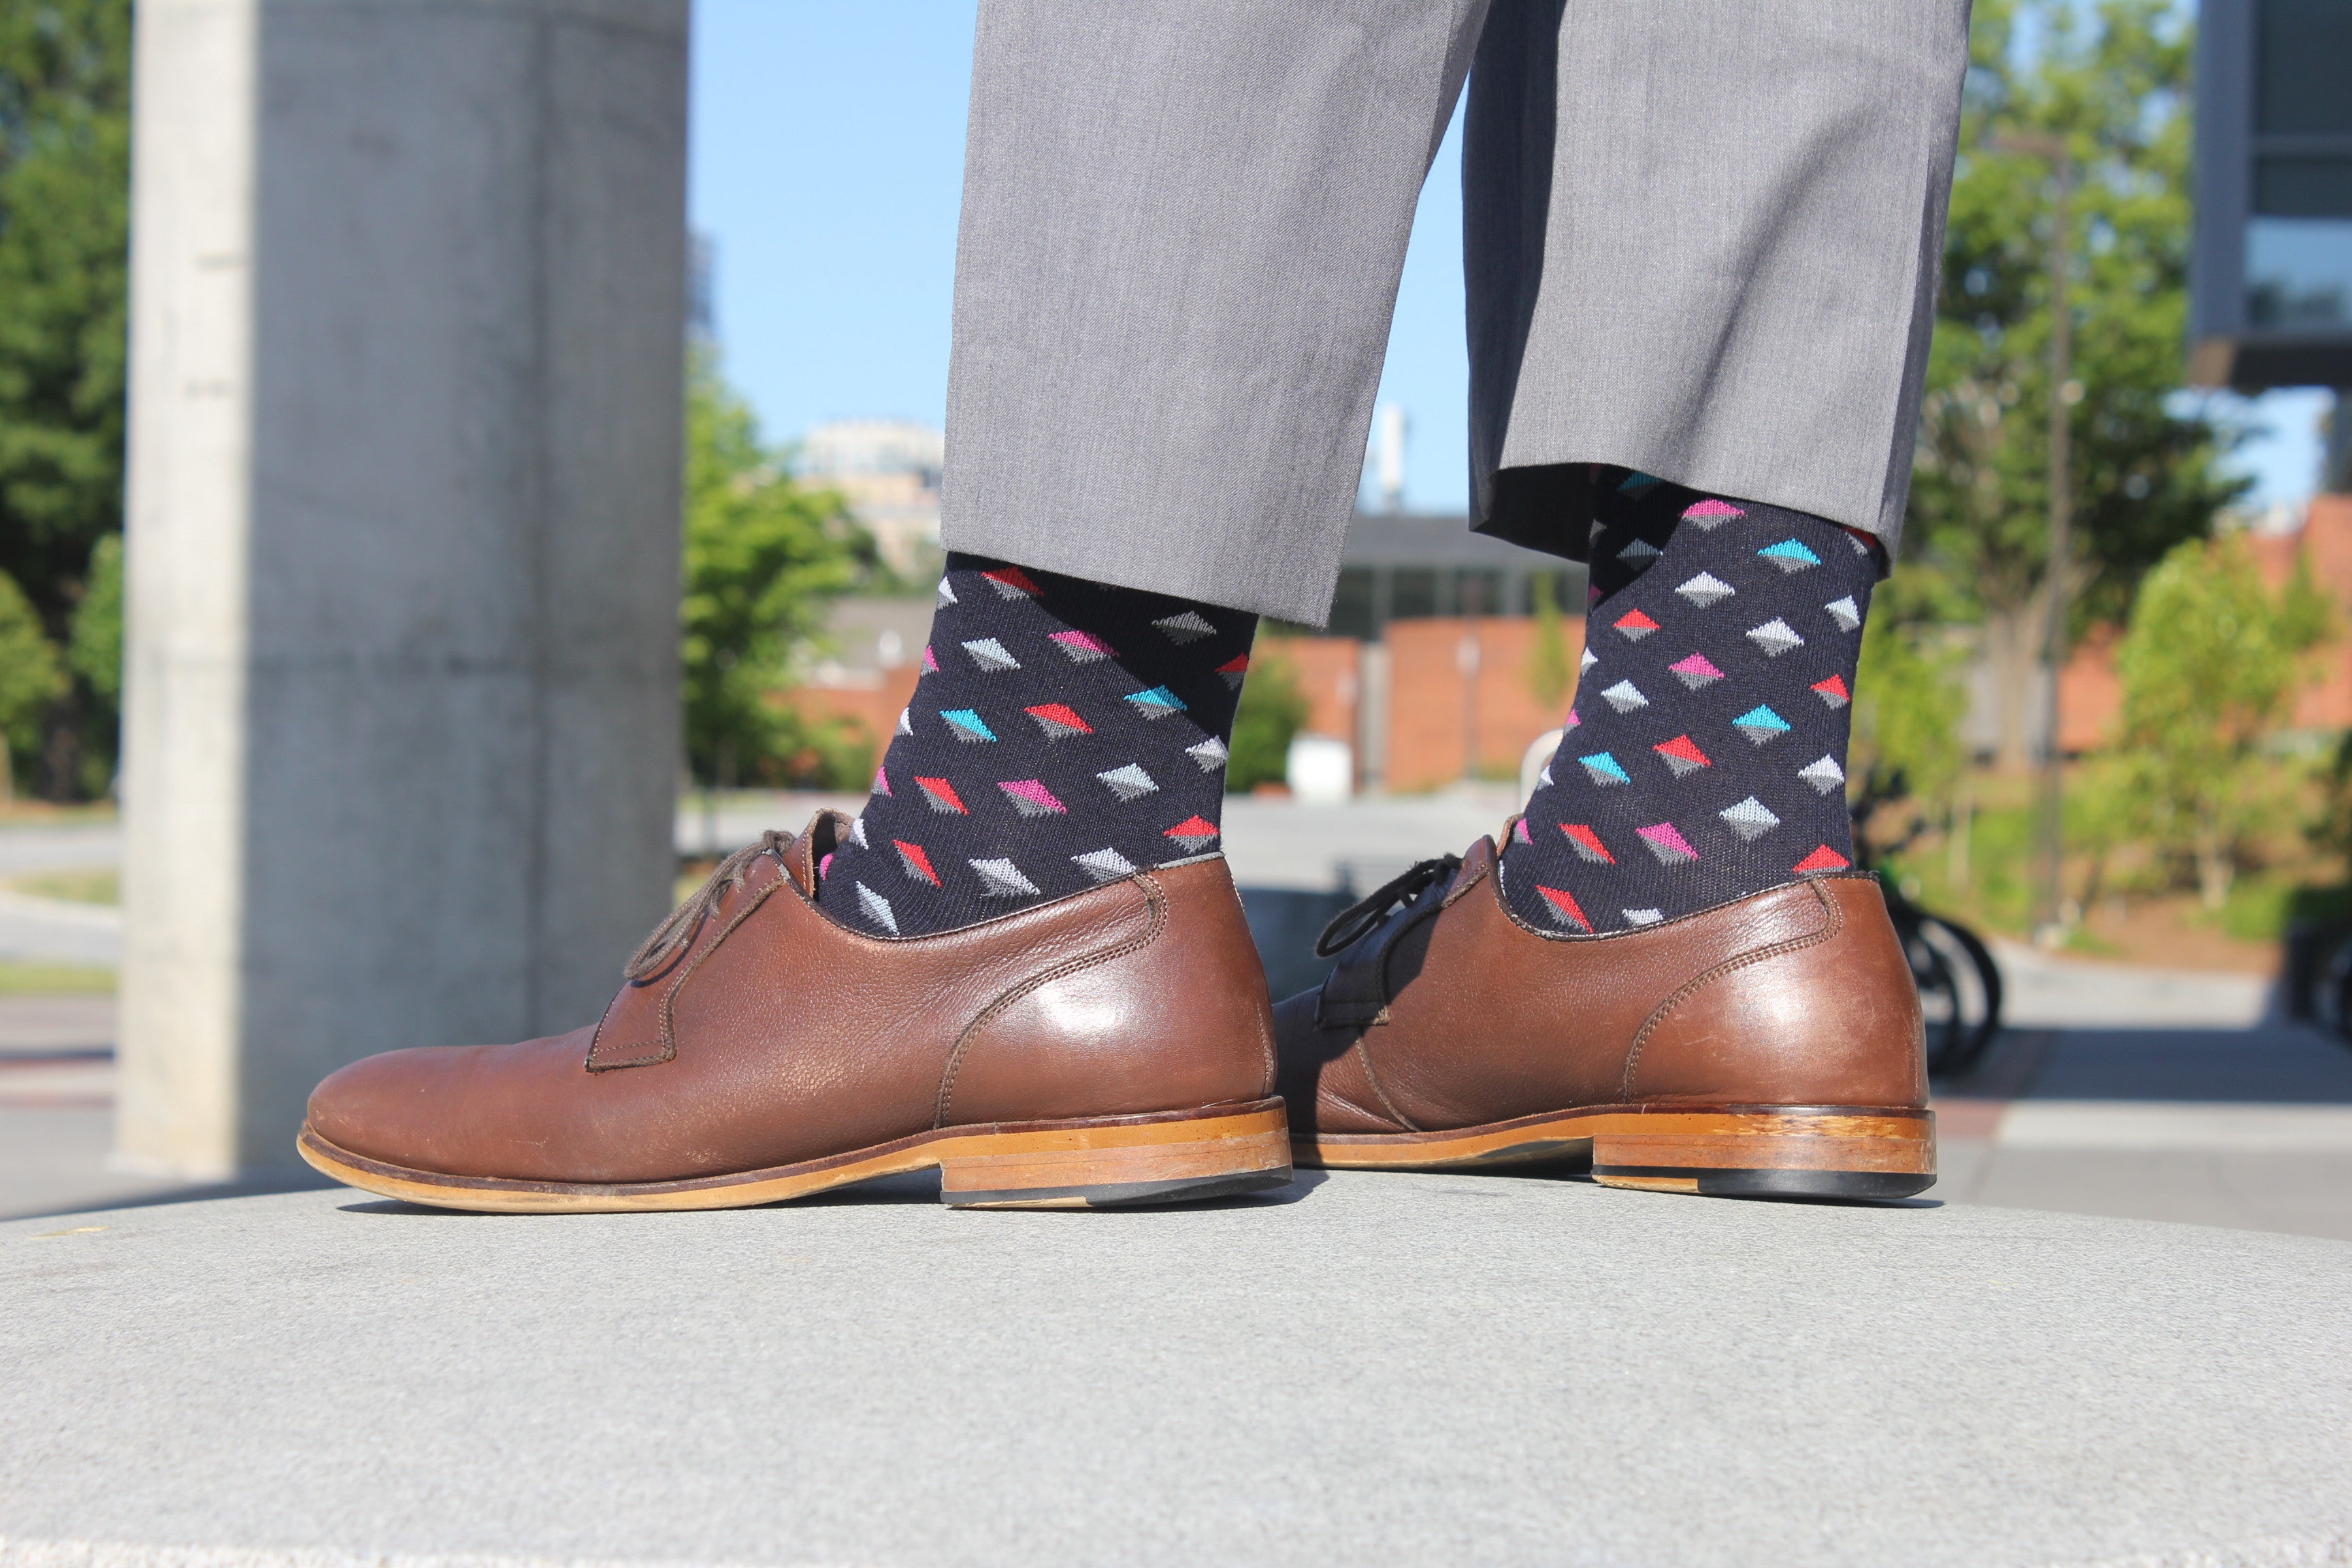 black over the calf dress socks with colored diamond pattern, brown dress shoes, light grey dress pants